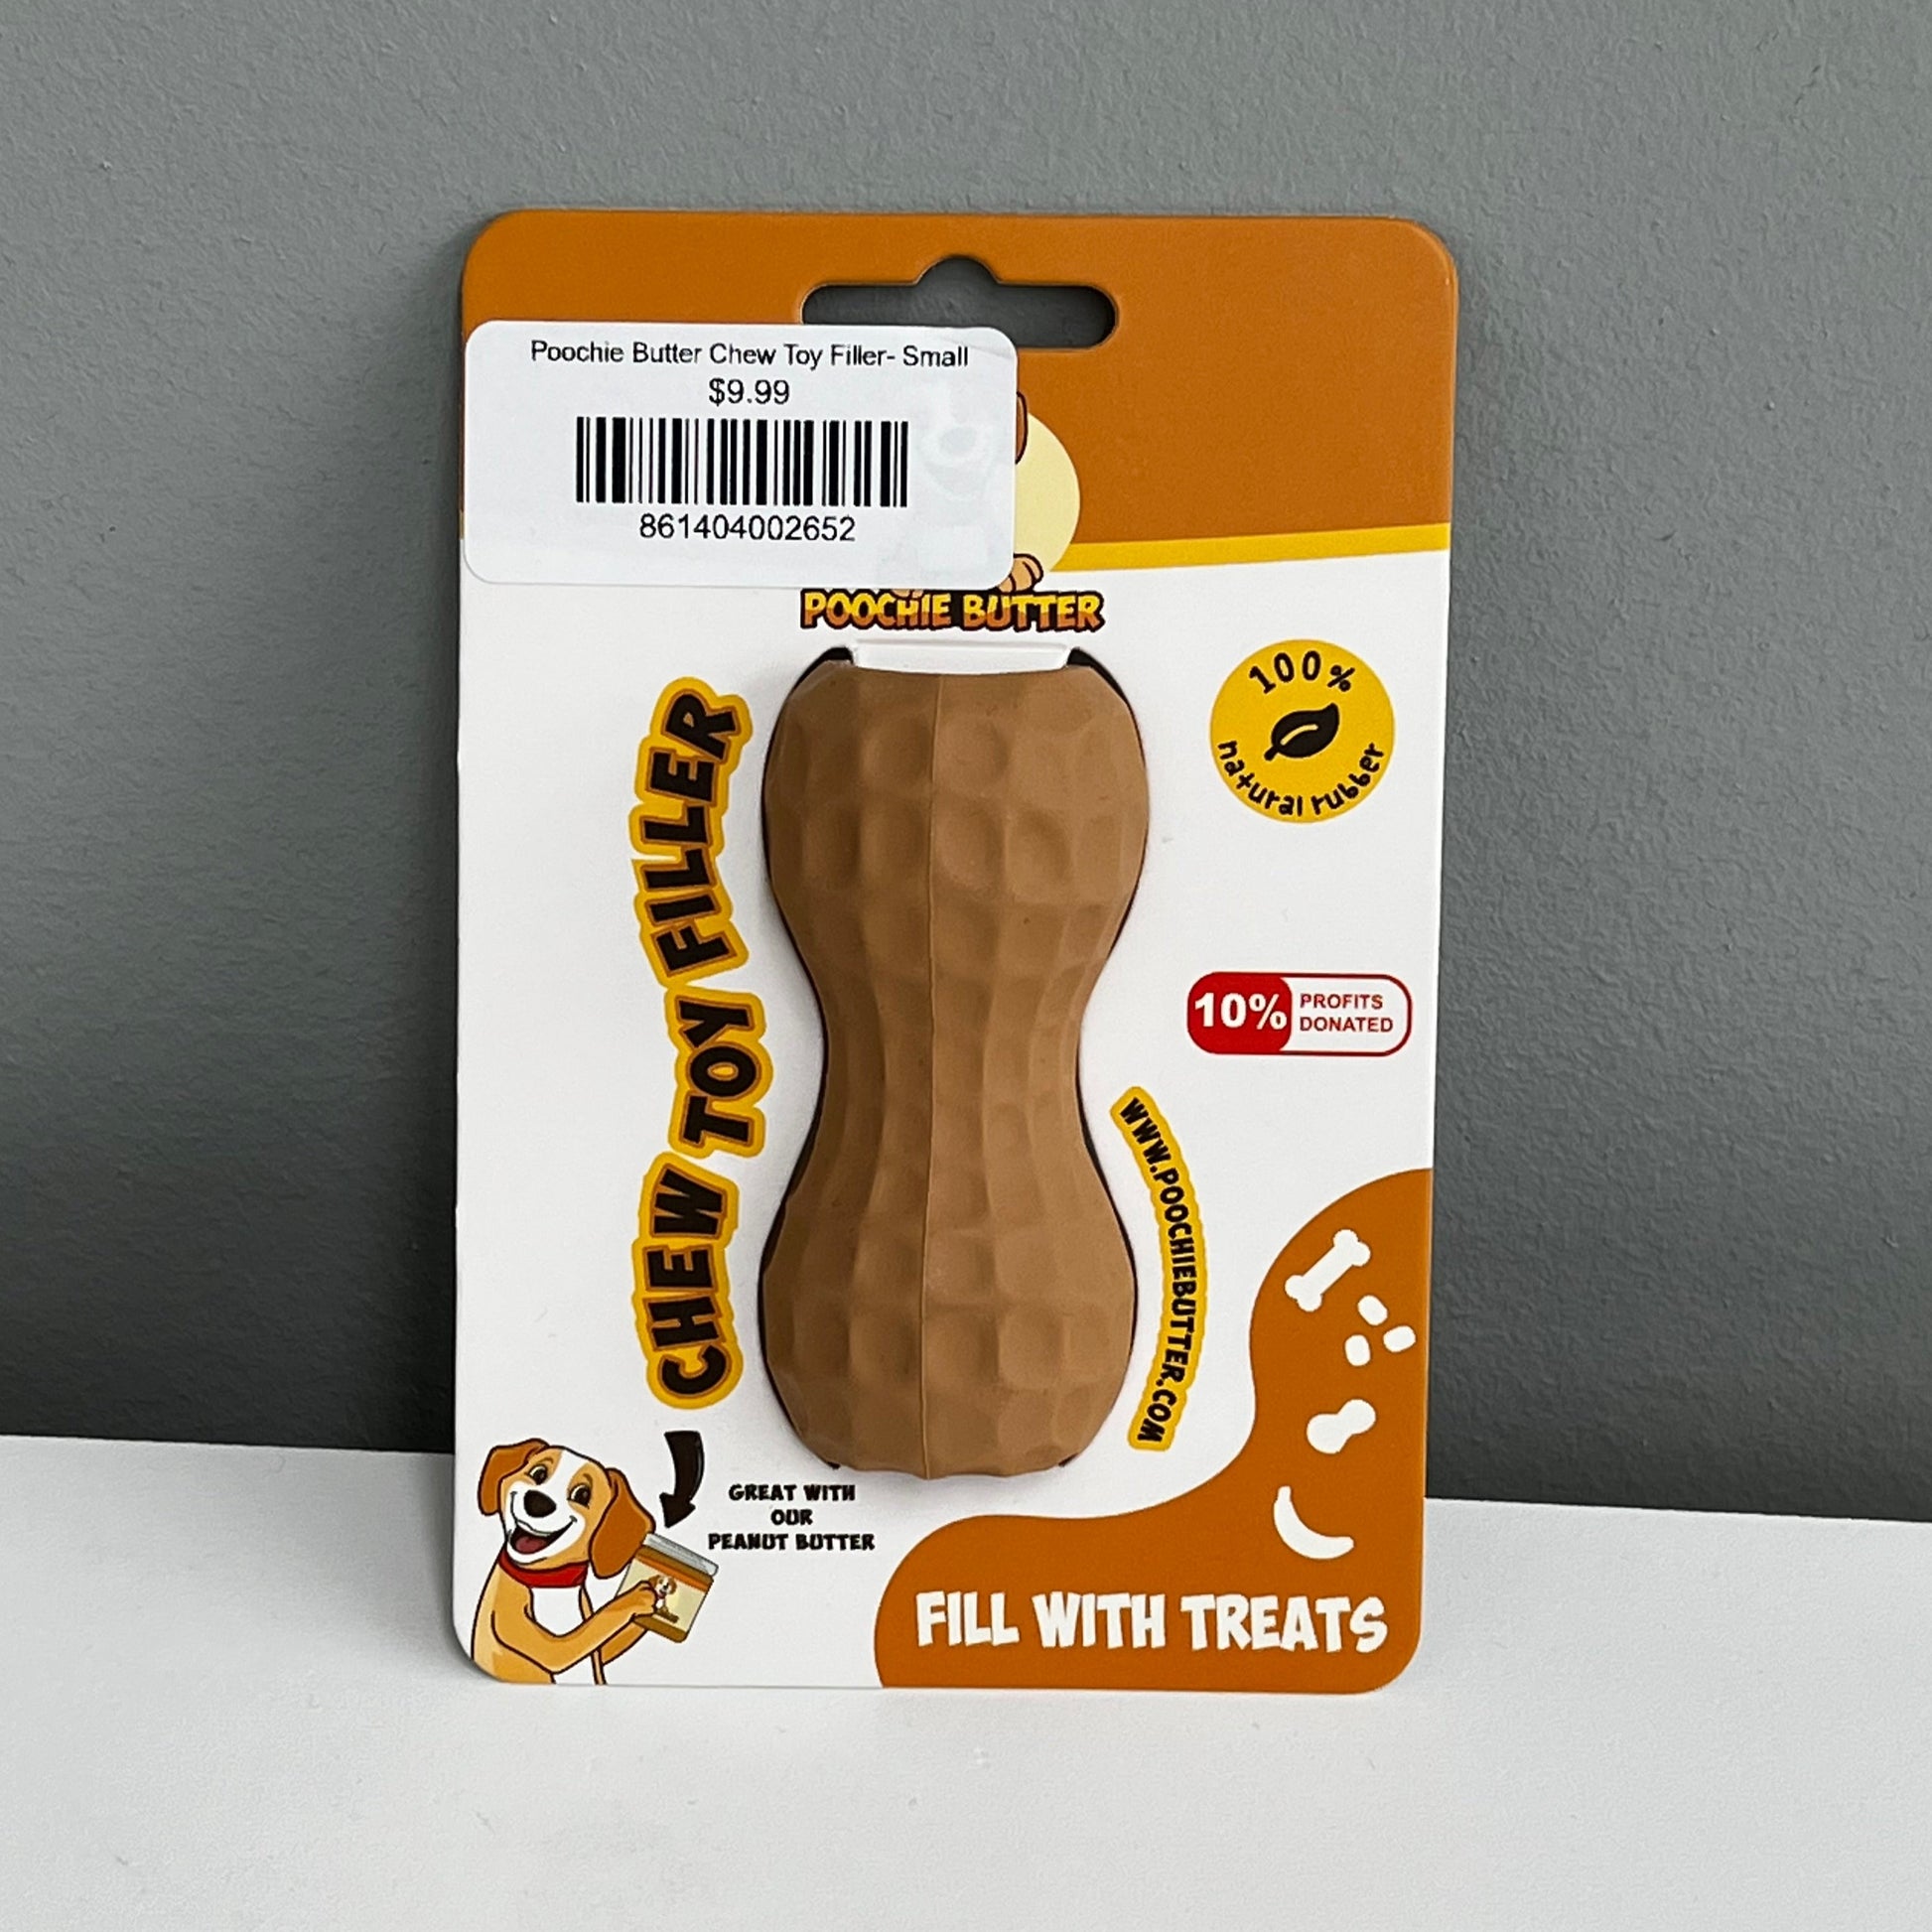 Peanut Butter Dog Toy | Dog Peanut Butter Toy Filler | Dog Chew Toy |  Poochie Butter Toy Medium